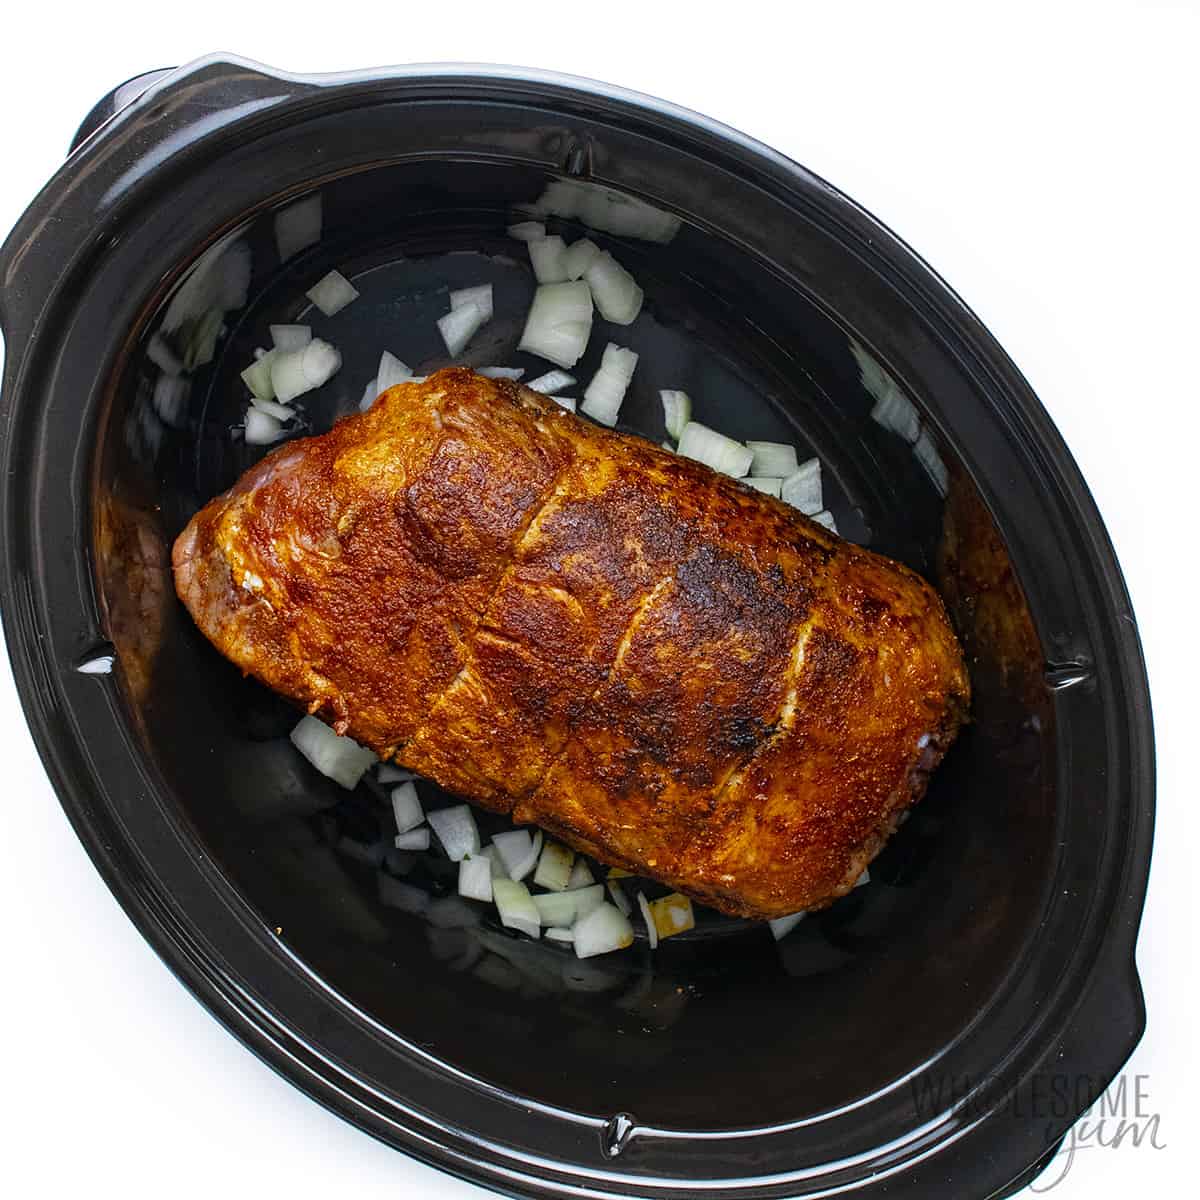 Seared pork in crock pot with onions.